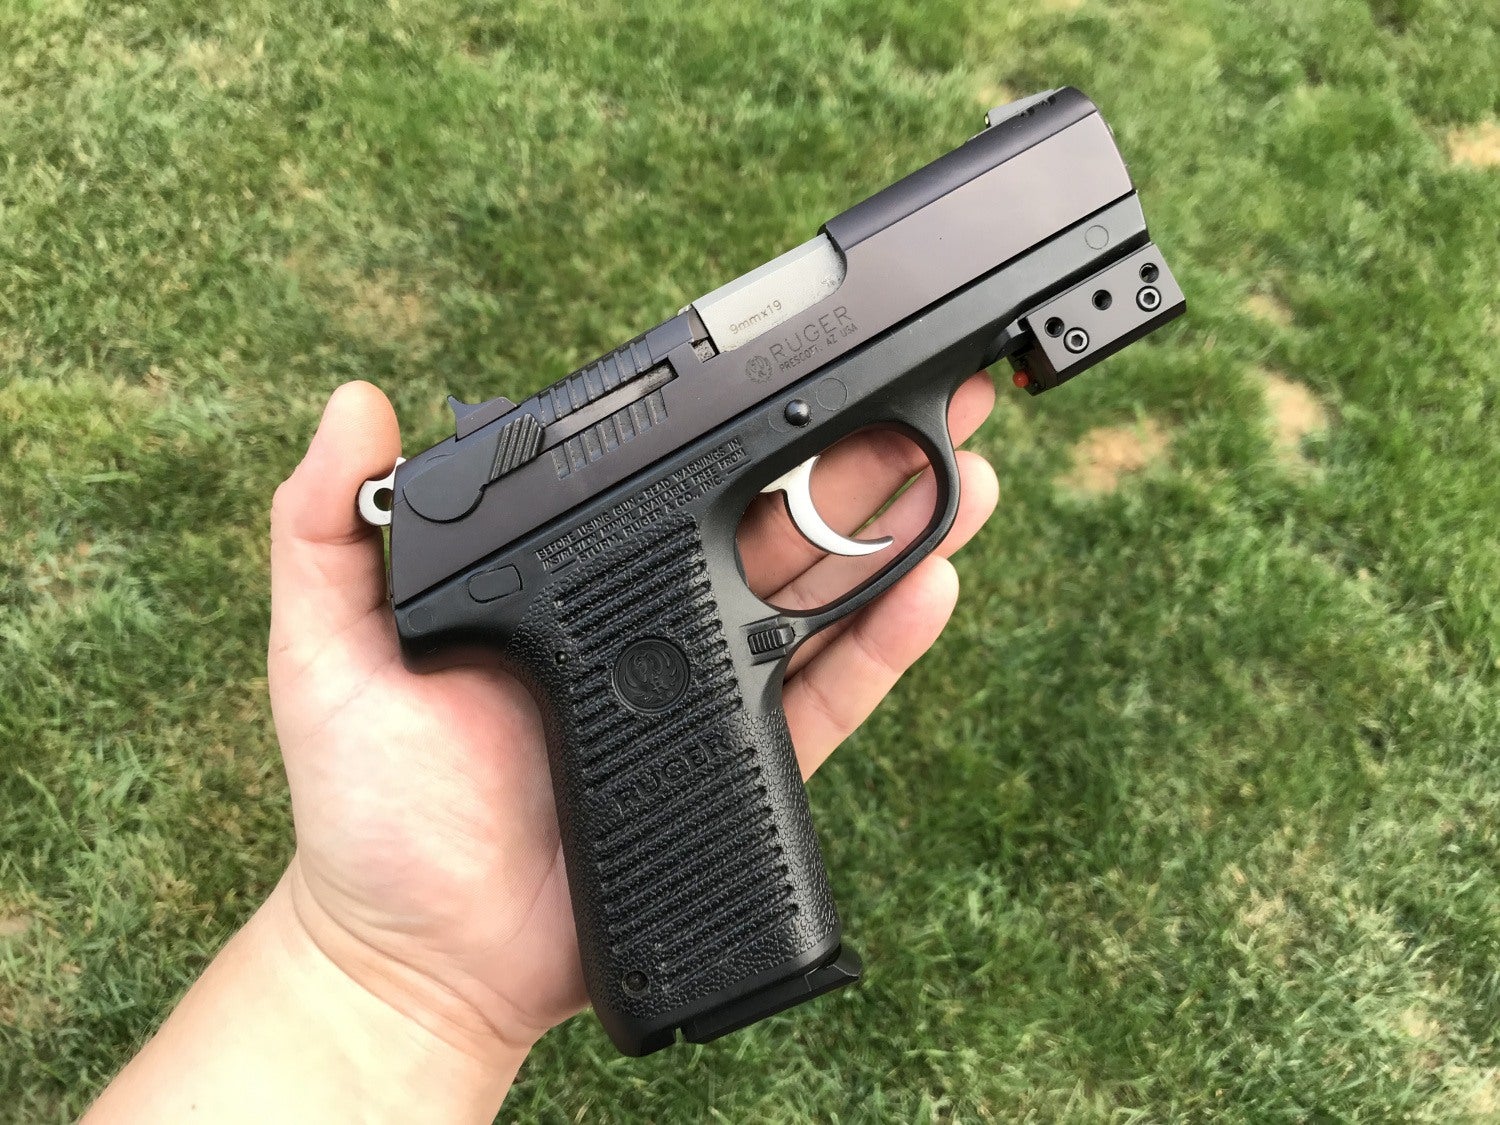 Pawn Shop Finds - The Cheap Ruger P95 Gem.